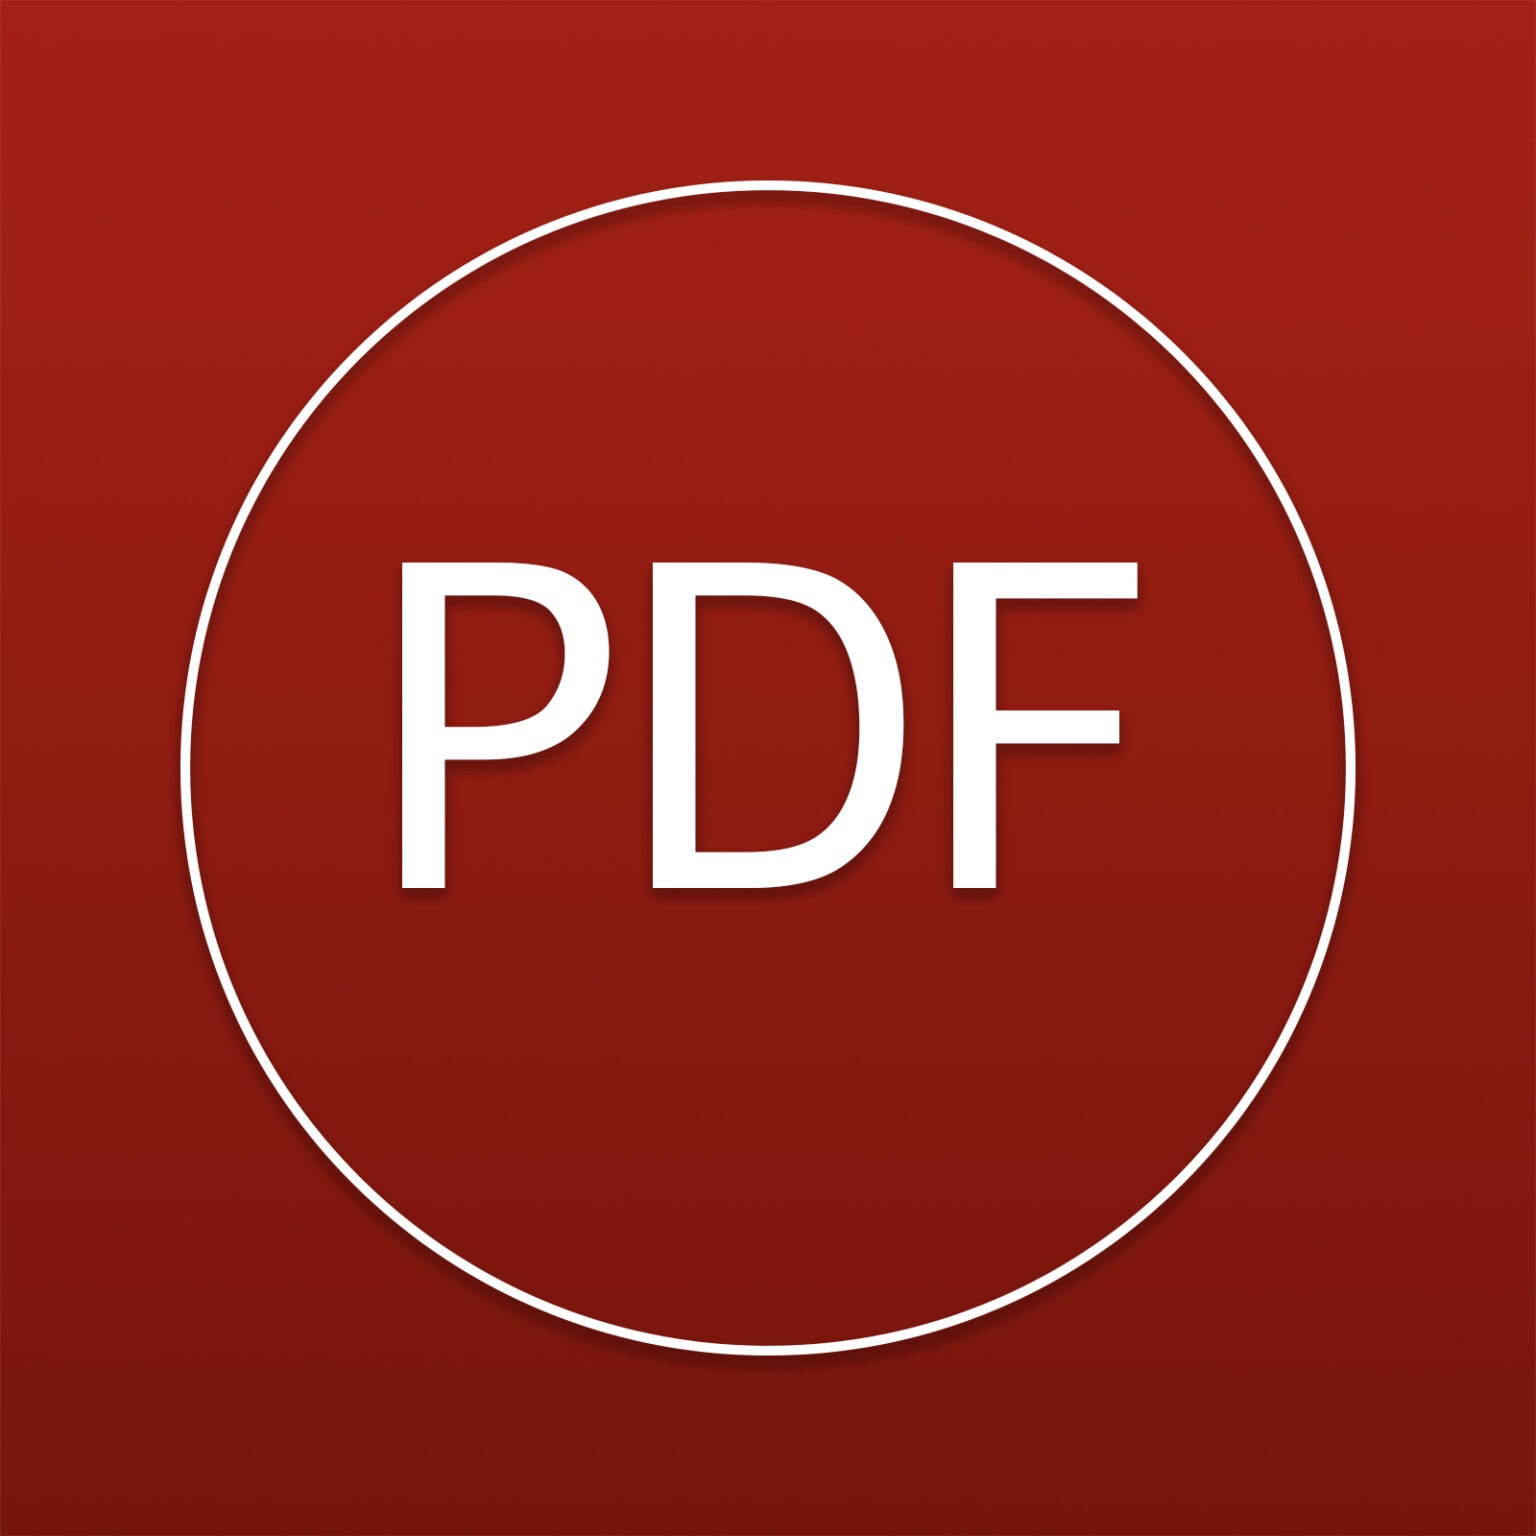 If you want a high-quality, feature-rich PDF editor but you don't want to pay top prices, PDF Editor PDF Book Reader could be your choice.